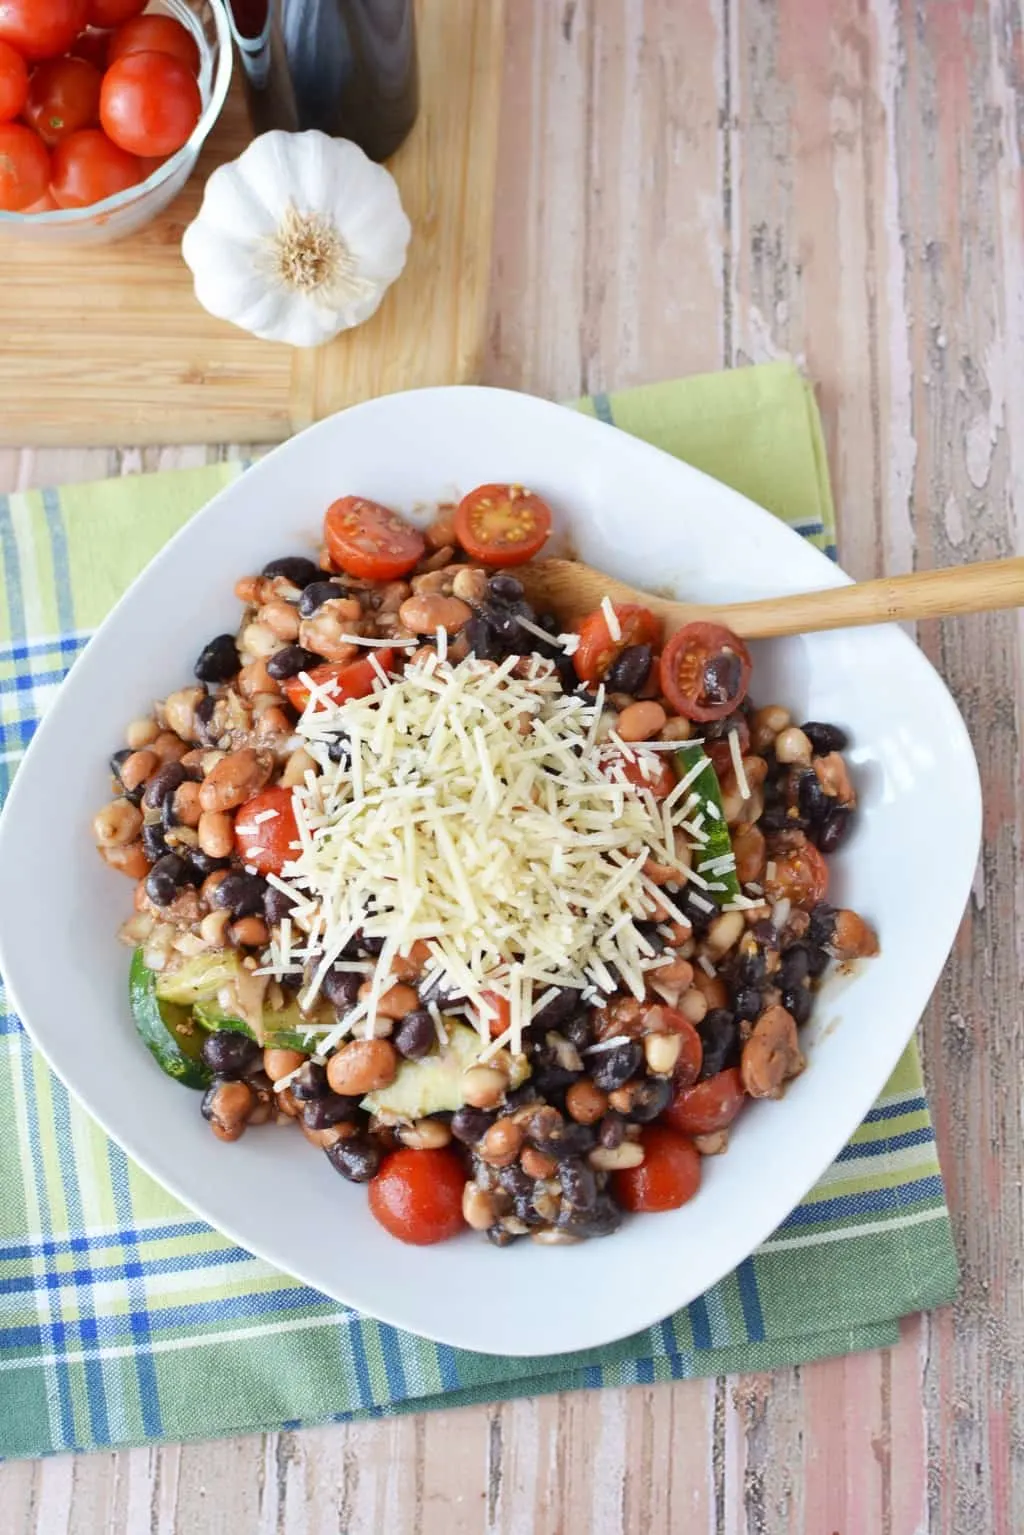 Are you planning a game day or super bowl party? This Easy Cold Bean Salad has the taste of 'mush' beans along with the crunch of an onion and a cucumber.  It also has a balsamic-y taste because of the vinegar, but it's not too strong.